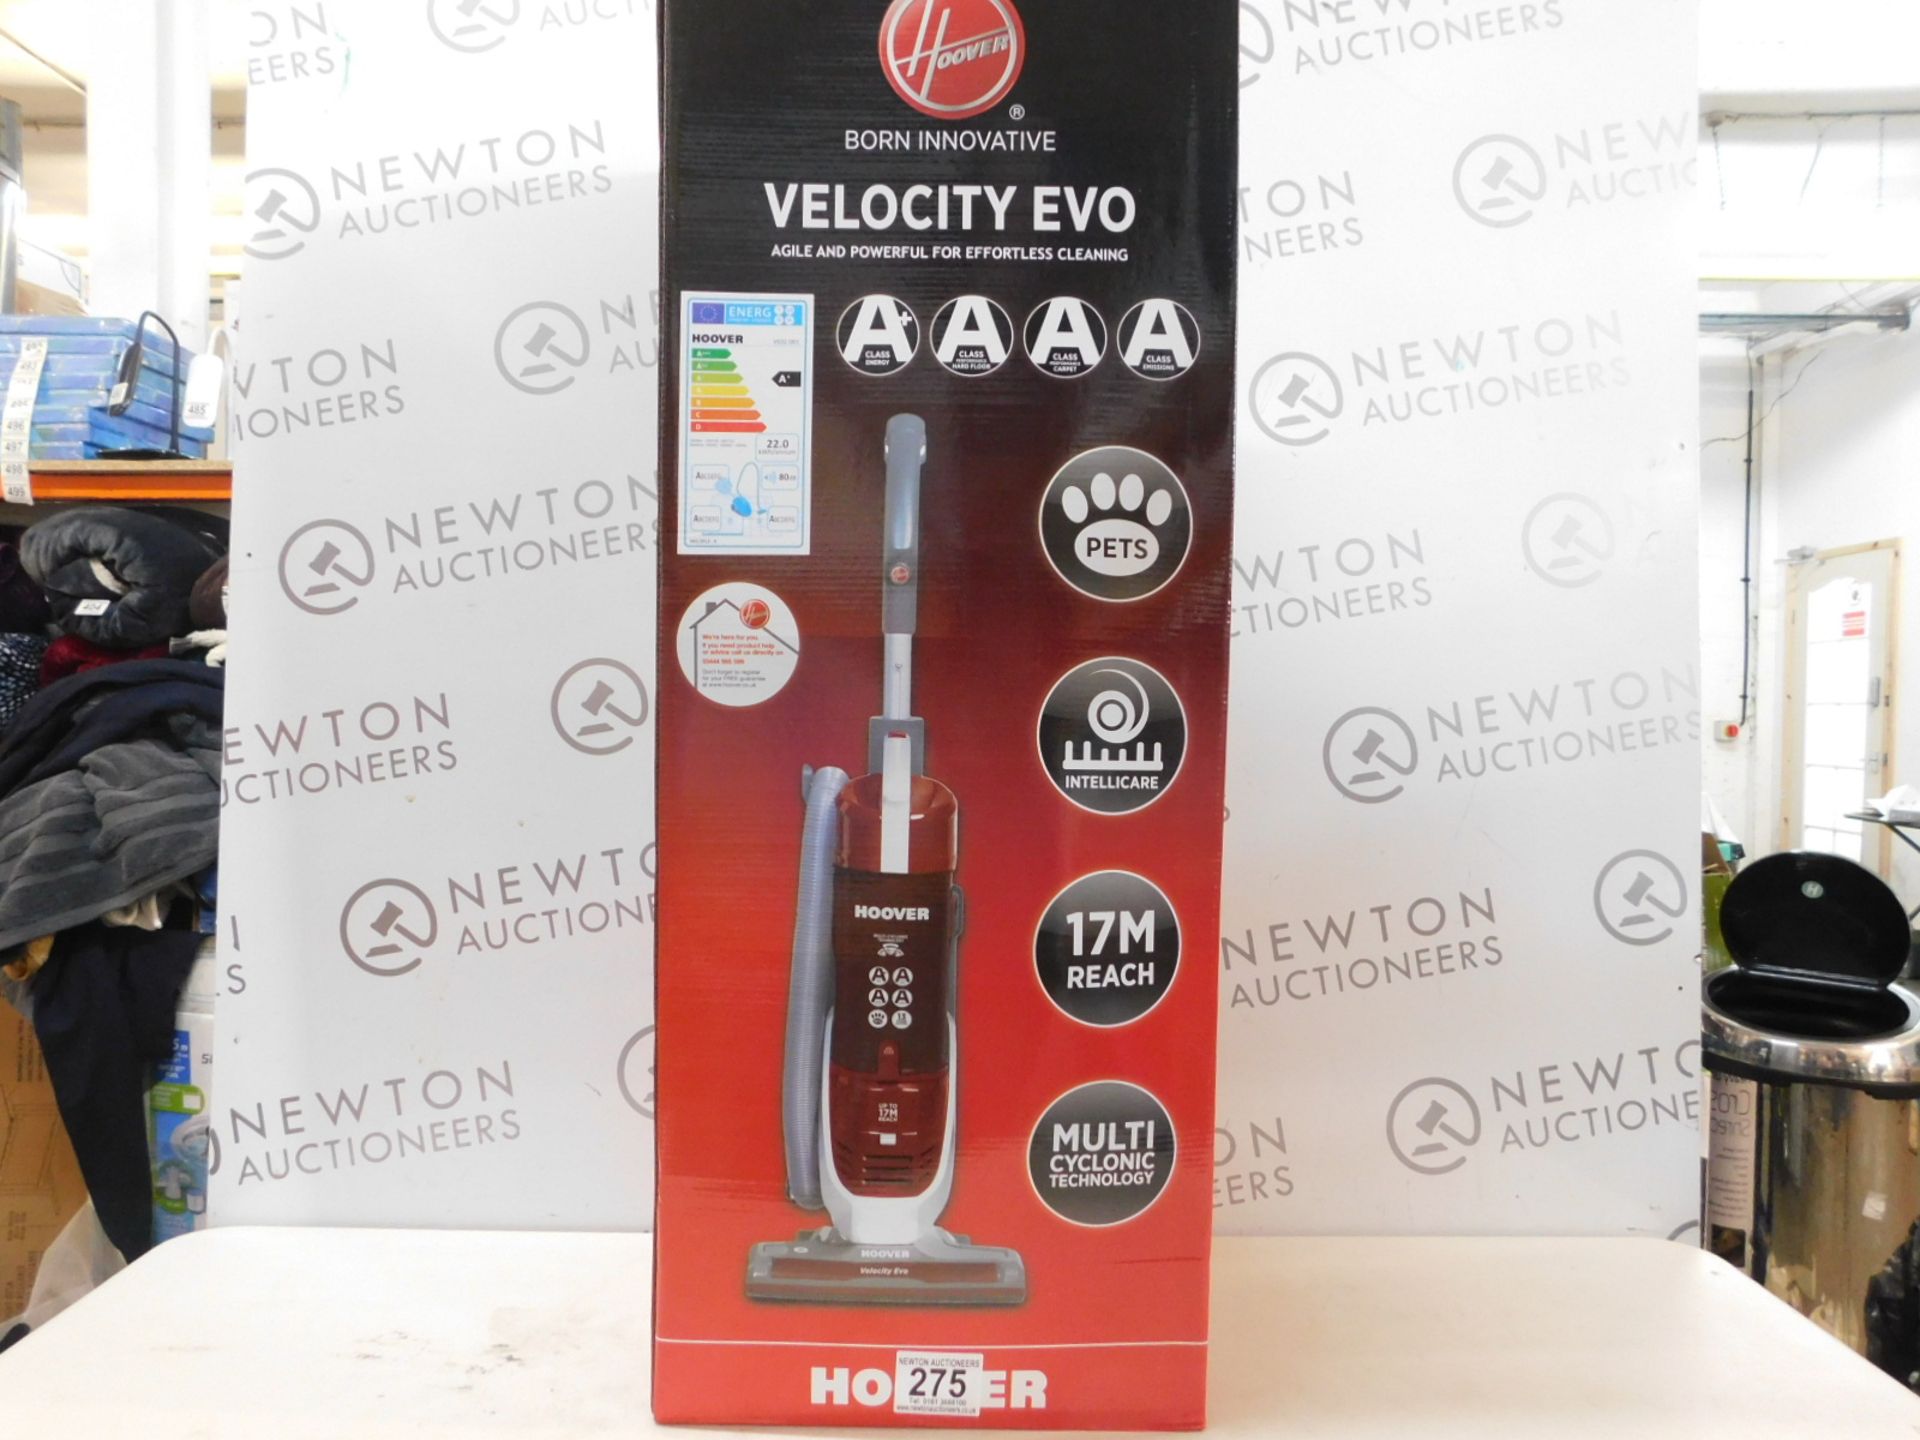 1 BOXED HOOVER VELOCITY EVO VE02 001 UPRIGHT VACUUM CLEANER RRP Â£149.99